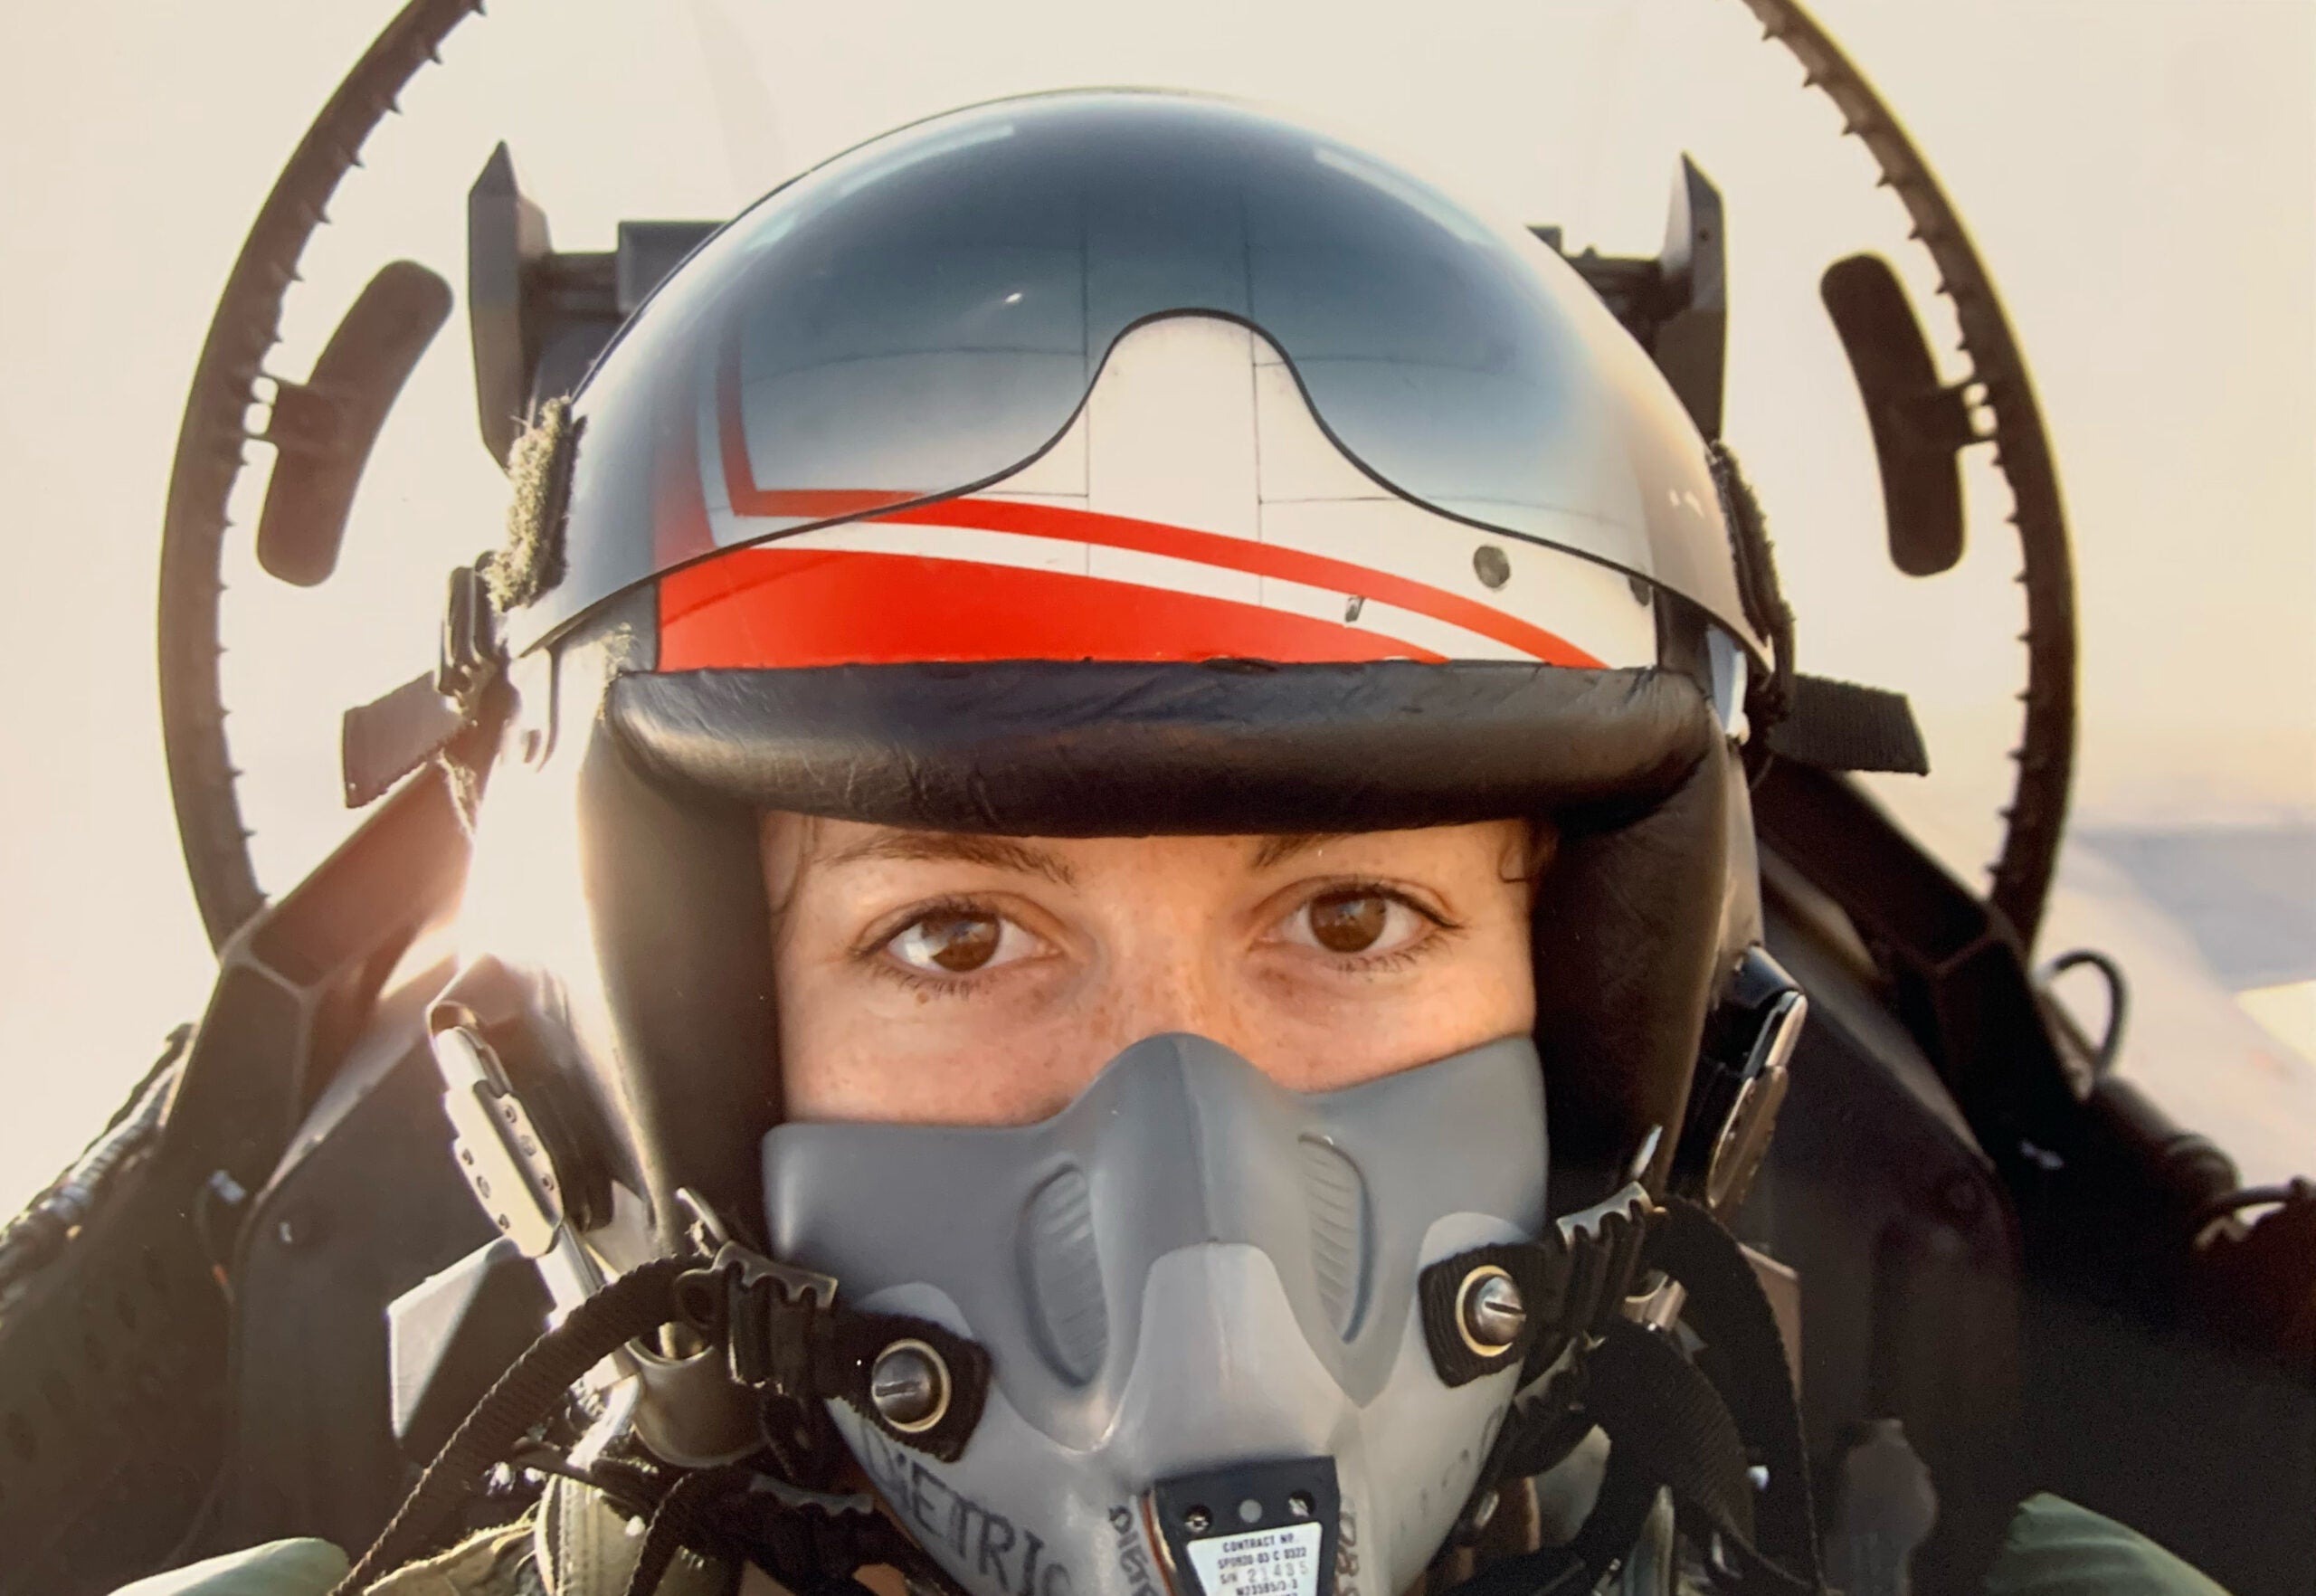 what it’s like inside a f/a-18 cockpit, according to a fighter pilot